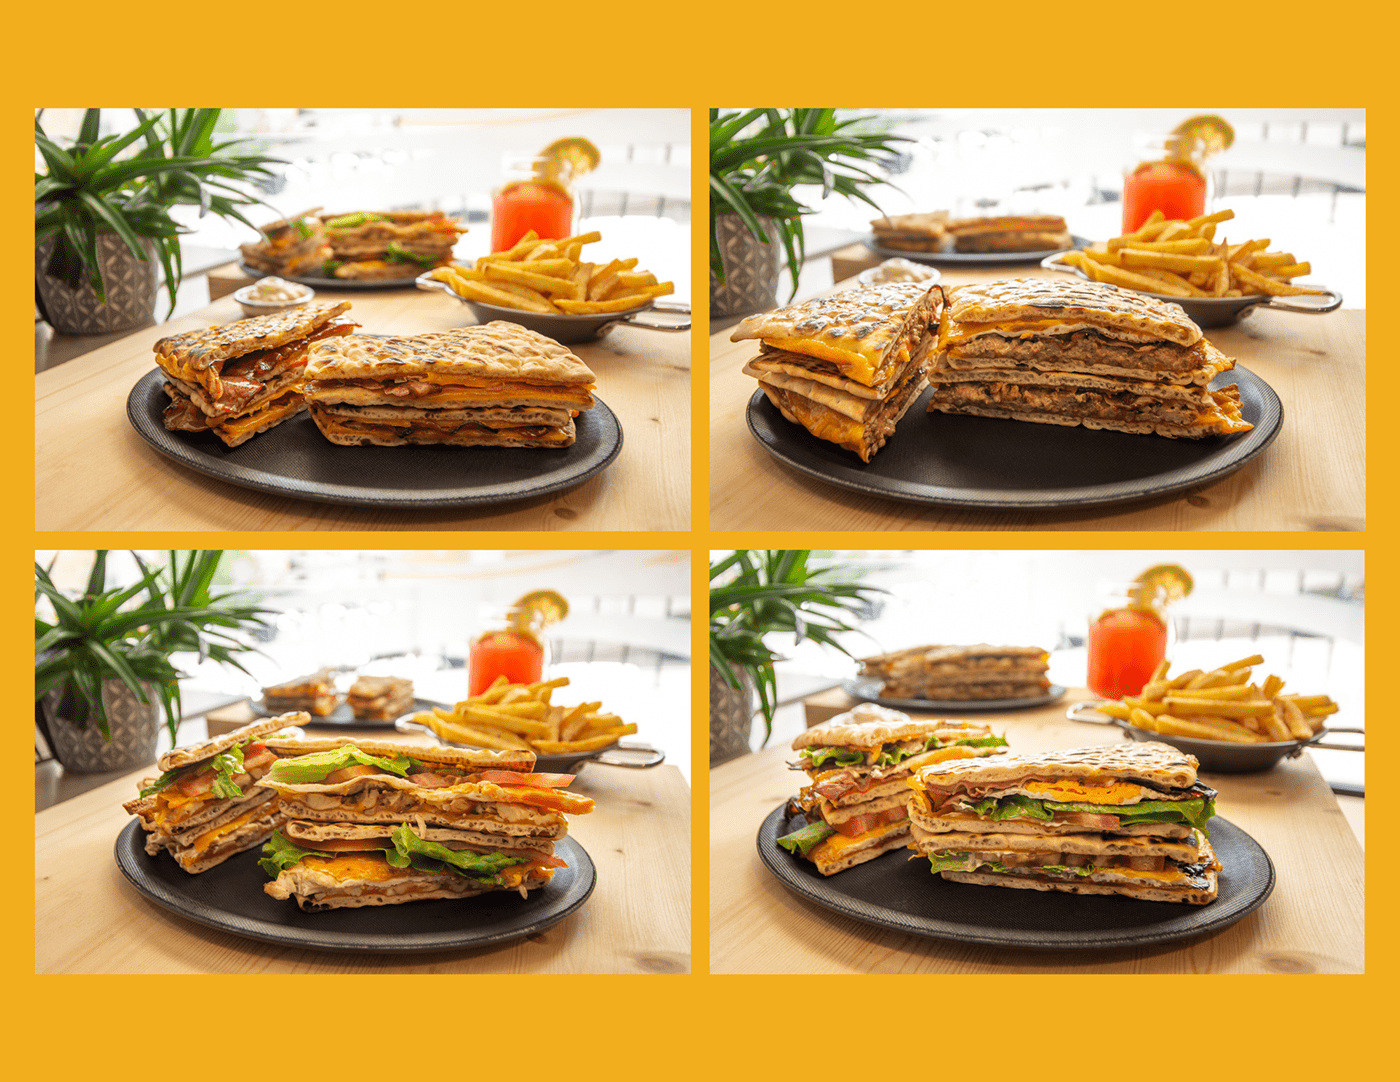 restaurant food photography of the cafe Flatbread Flavours and their sandwiches for Uber Eats